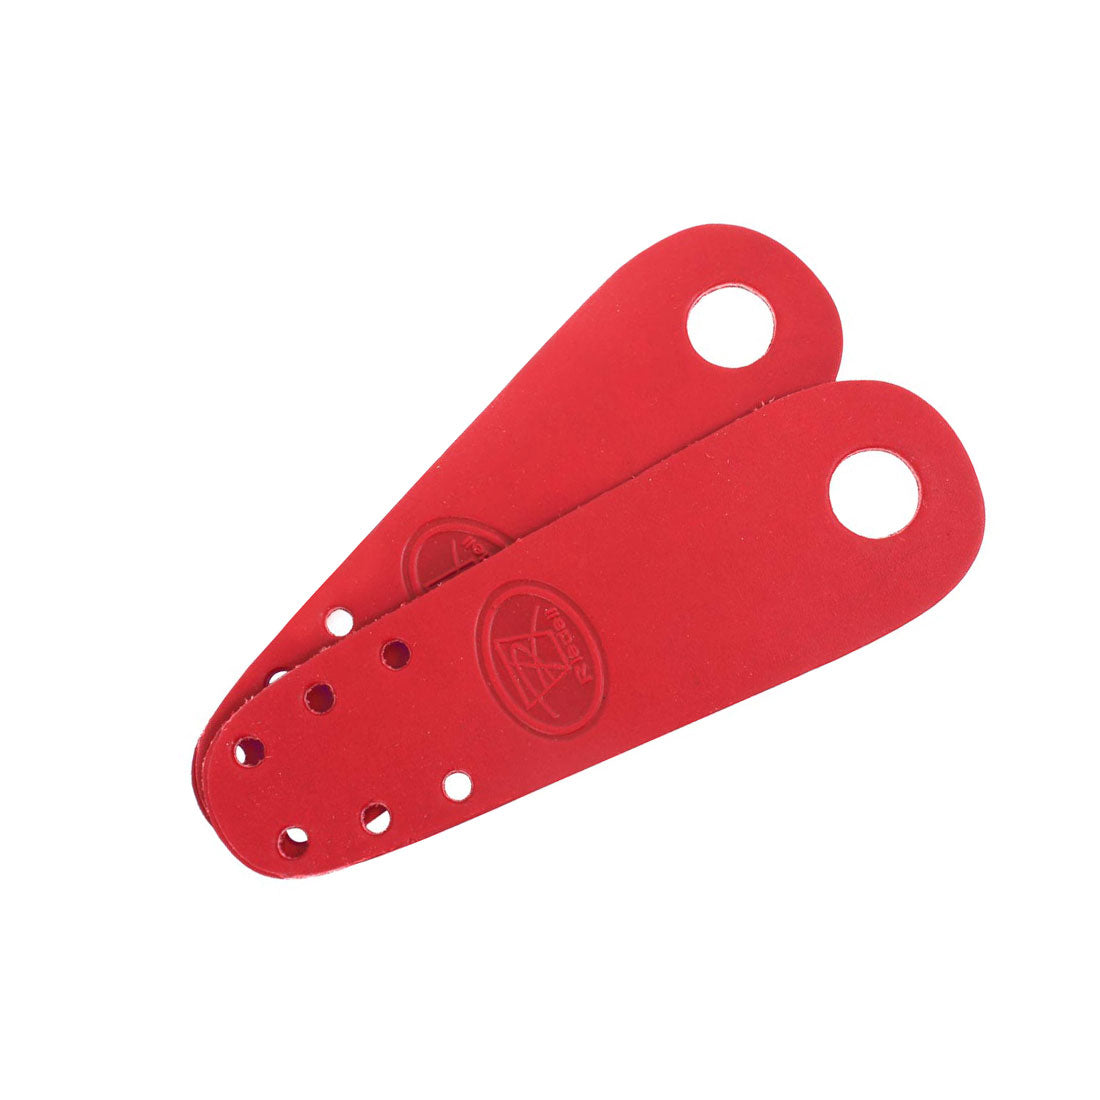 Riedell Flat Toe Guards 2pk - Leather Red Roller Skate Hardware and Parts